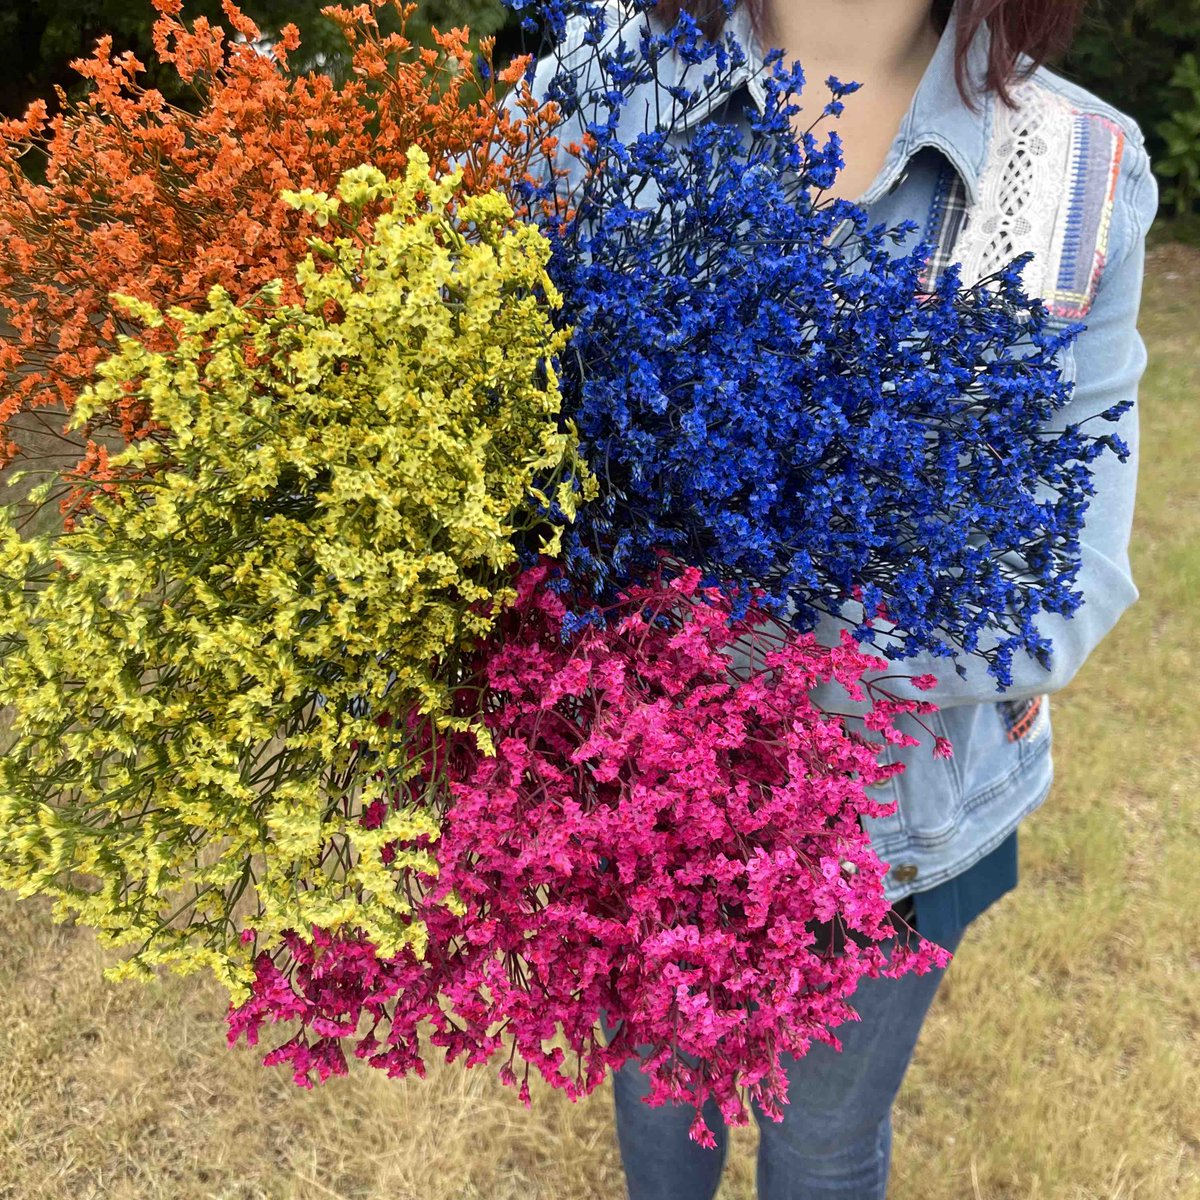 If you’re looking for colorful you’re in the right place! 🧡💛🩷💙
.
.
#steinflorist #steinyourflorist #flowers #florist #flowershop #floristry #shopsmall #shoplocal #smallbusiness #phillyflorist #philadelphiaflorist #NJflorist #colorful #beautiful